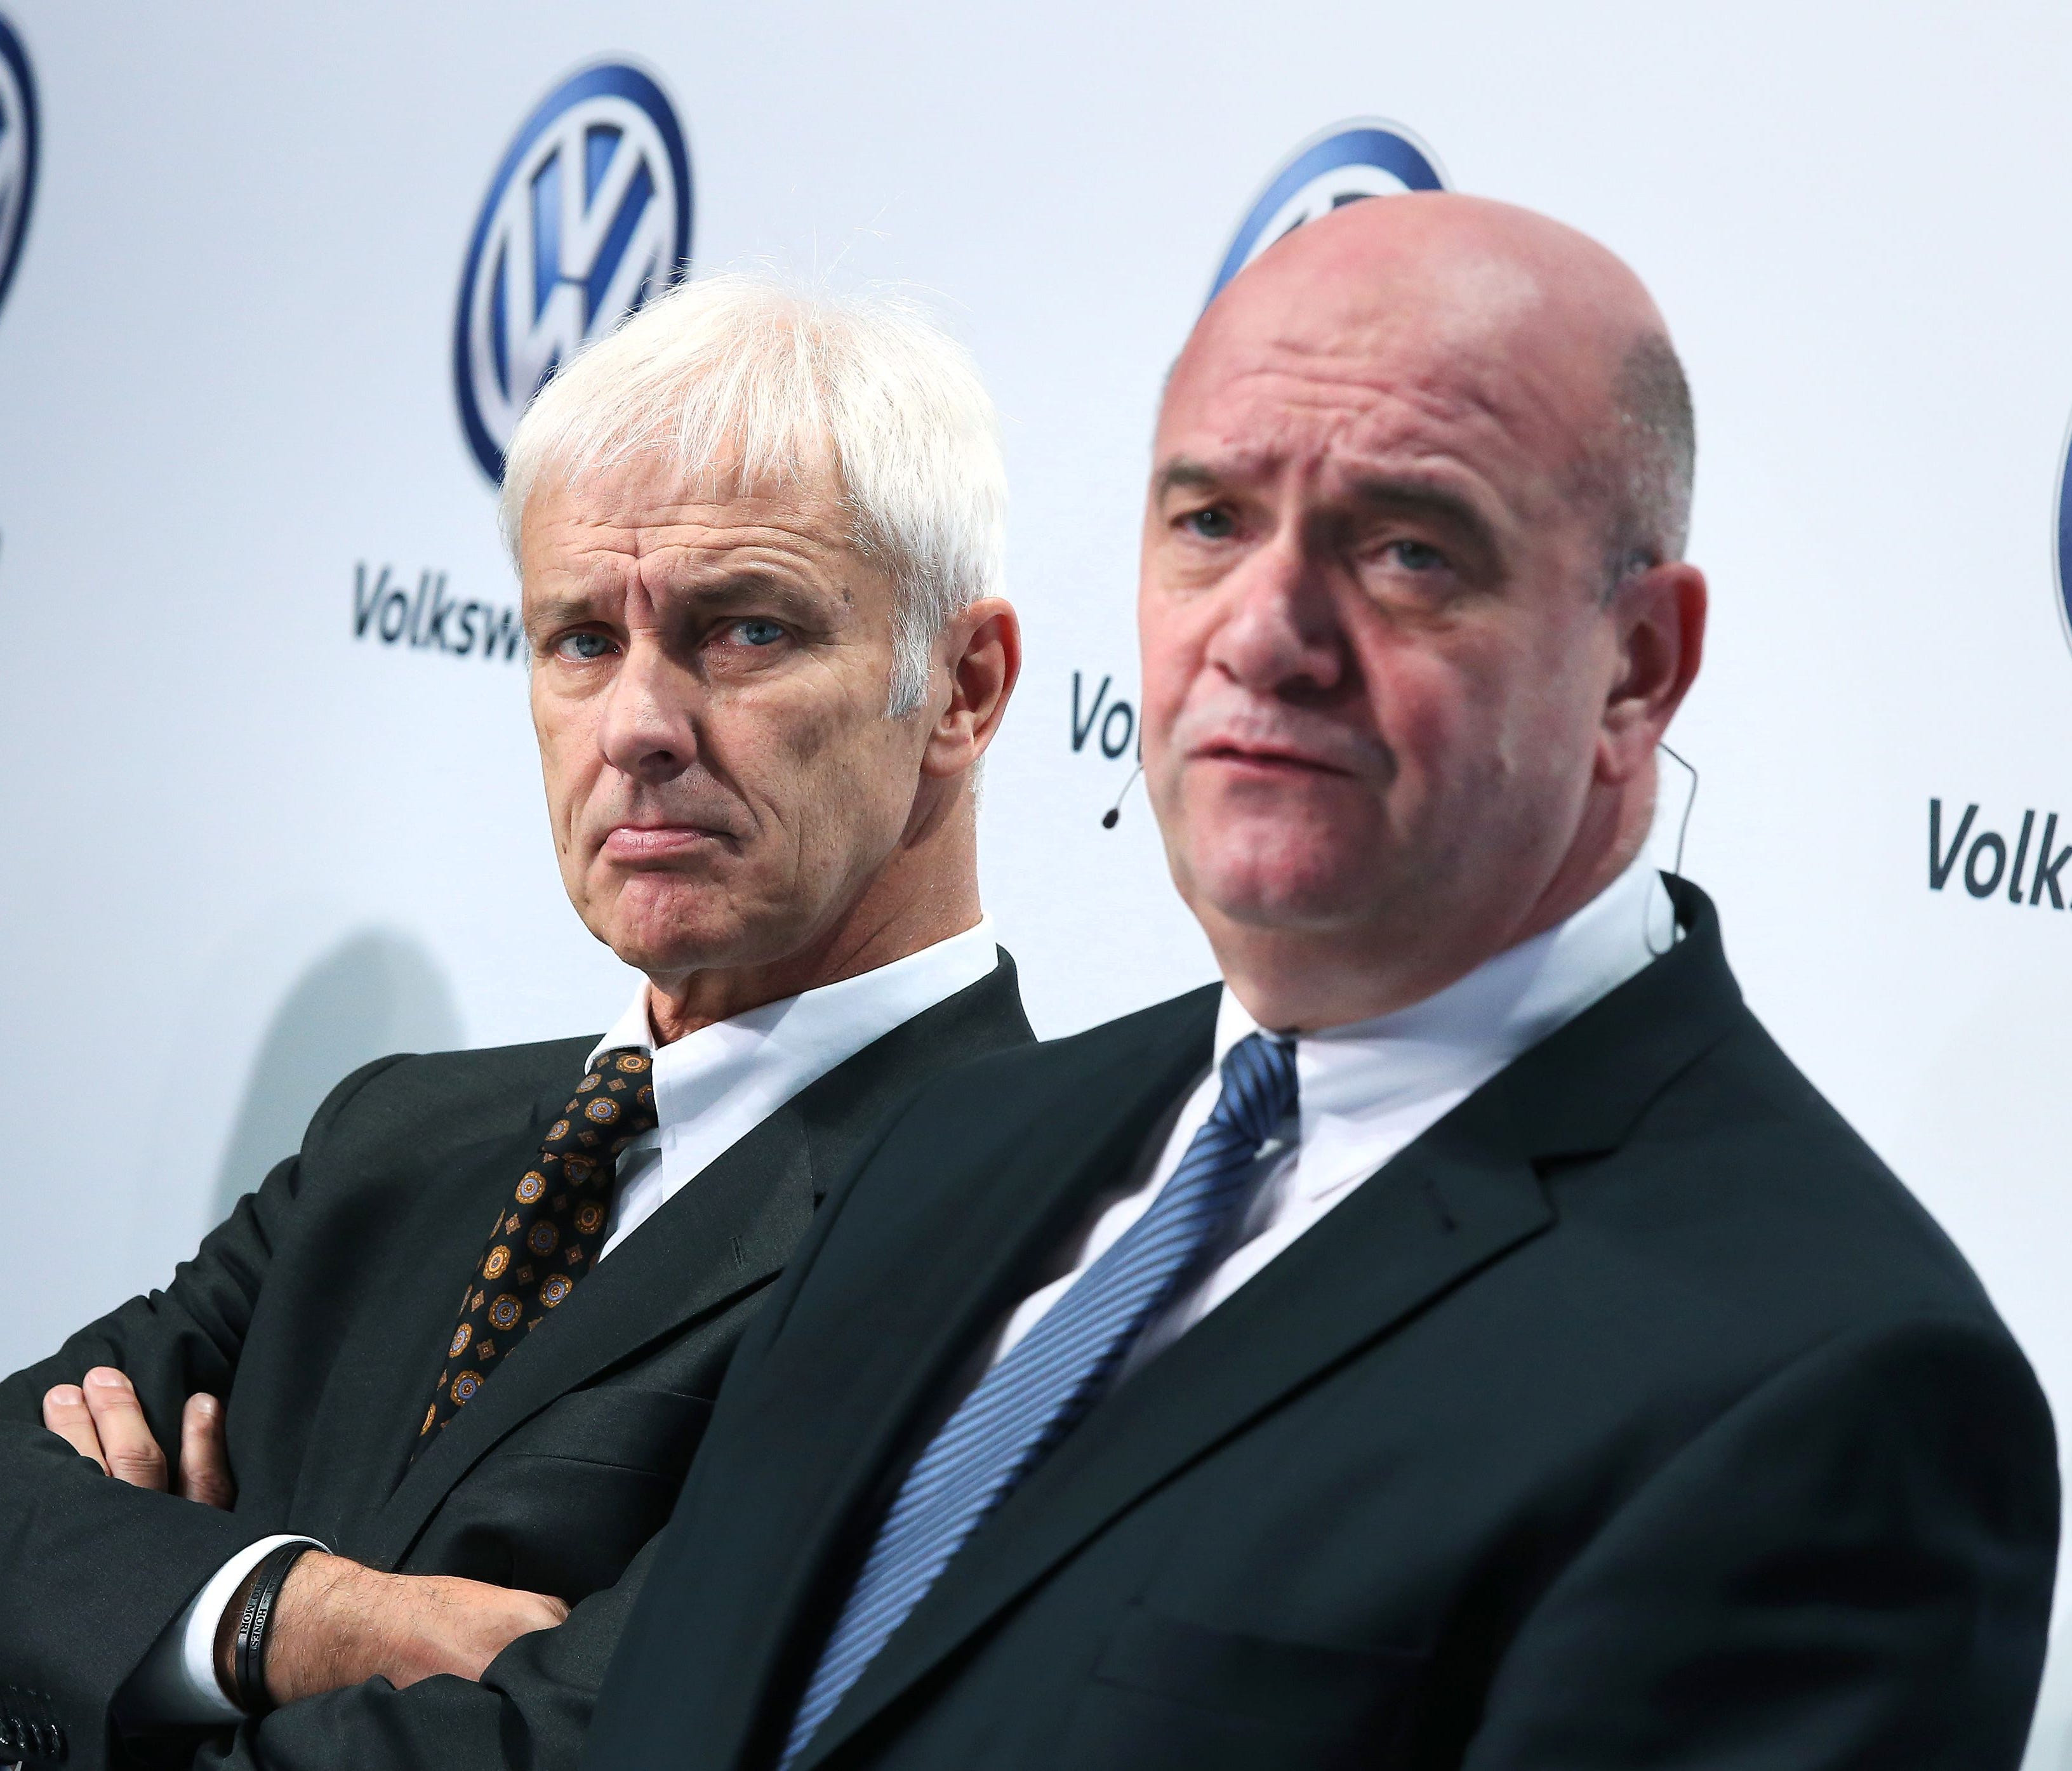 The CEO of German carmaker Volkswagen Matthias Mueller (left)  and the Chairman of VW Works council Bernd Osterloh attend the company's press conference on Nov. 18, 2016 in Wolfsburg, northern Germany.